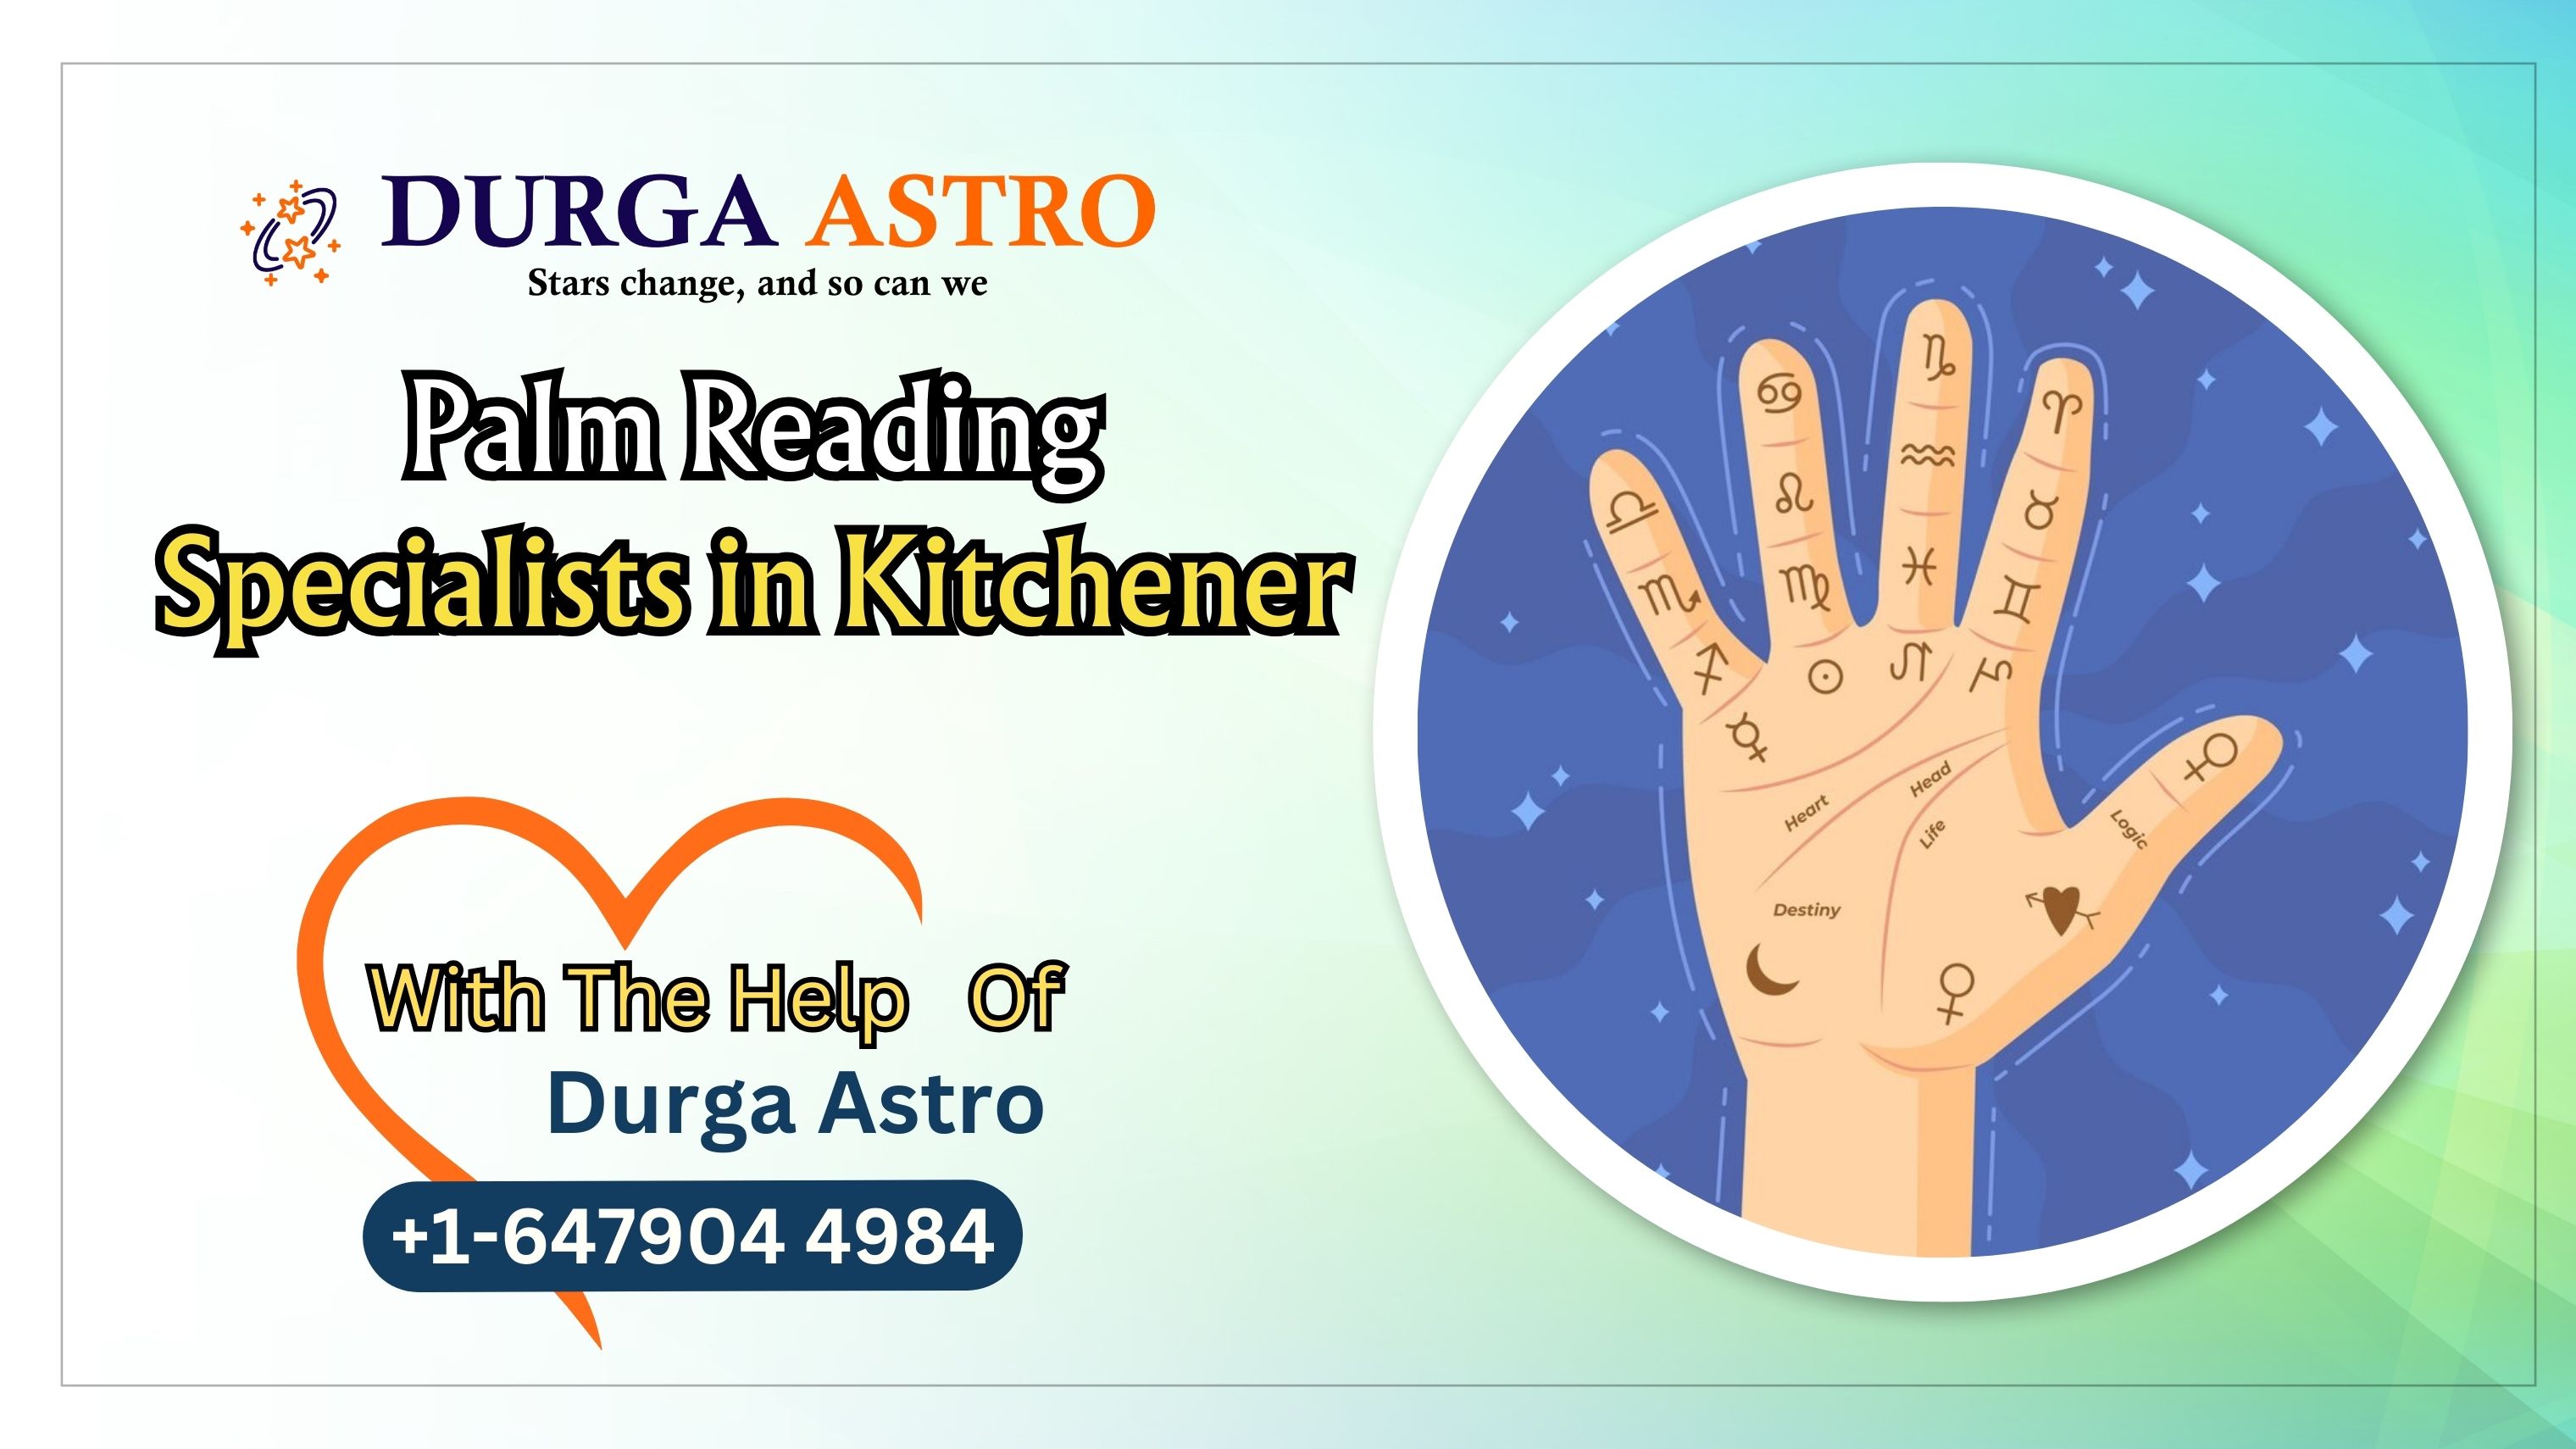 Palm Reading Specialists in Kitchener